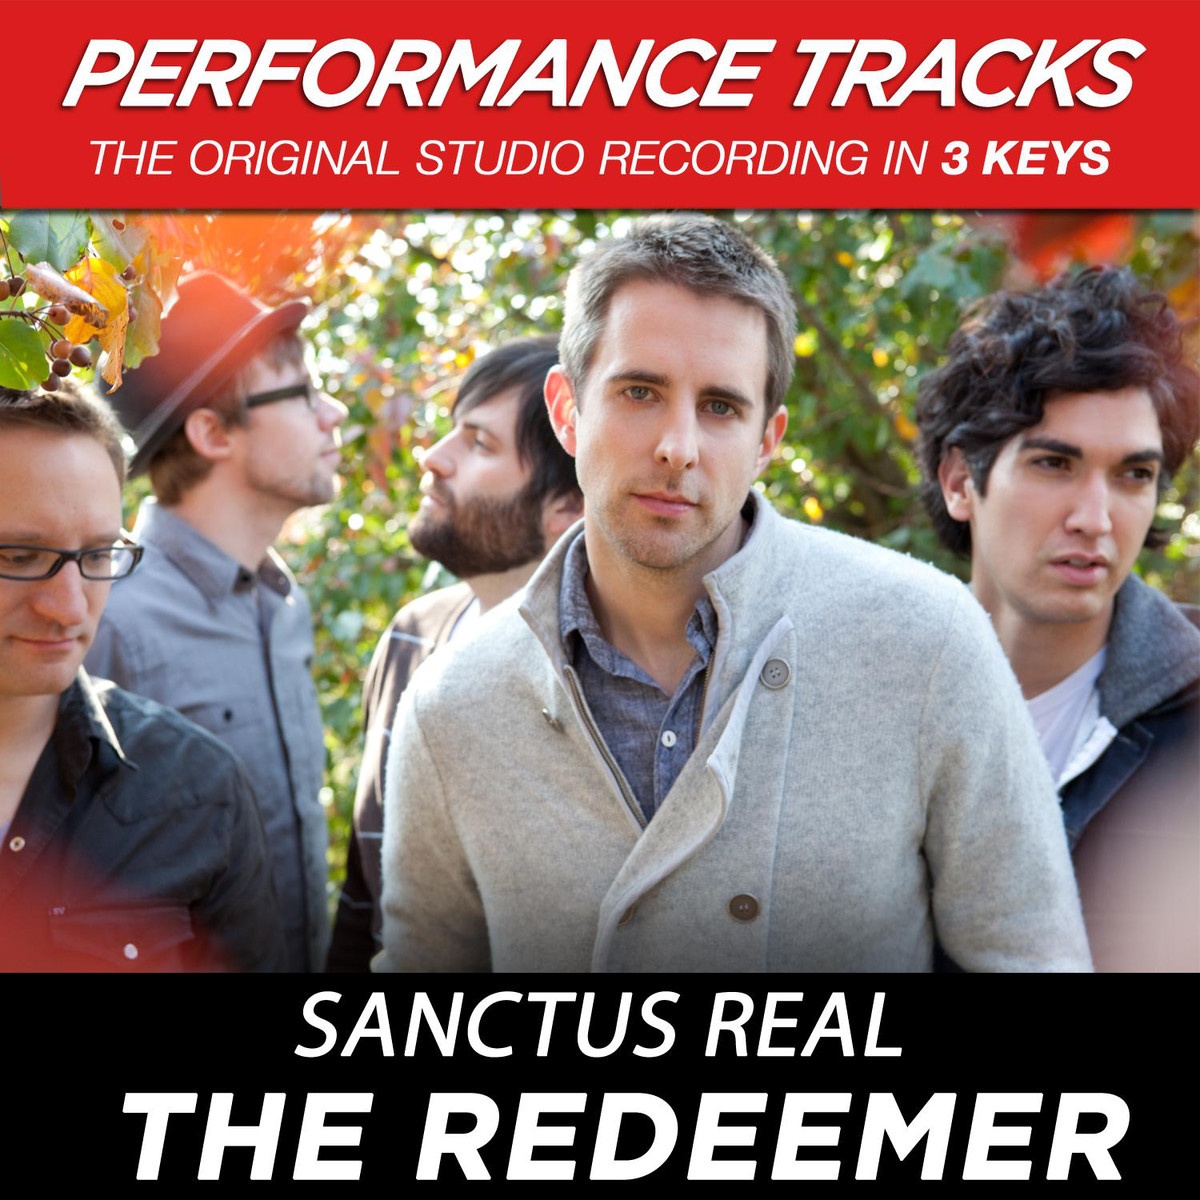 The Redeemer (Low Key Performance Track Without Background Vocals)